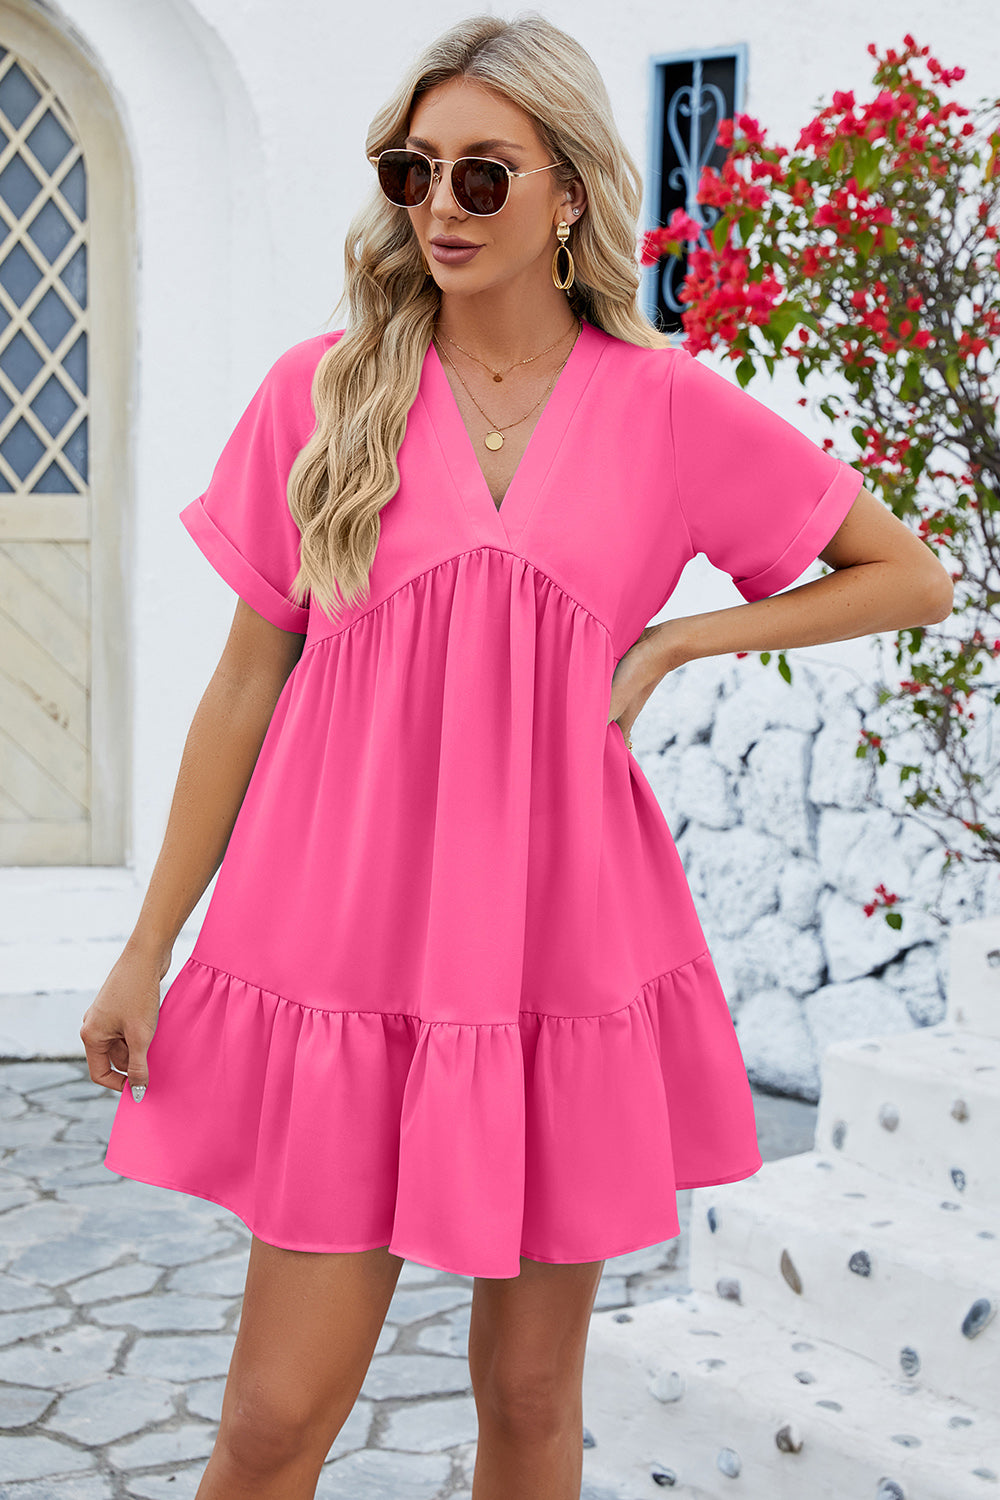 Ruched Tiered V-Neck Short Sleeve Mini Dress (5 Colors) Dress Krazy Heart Designs Boutique Hot Pink S 